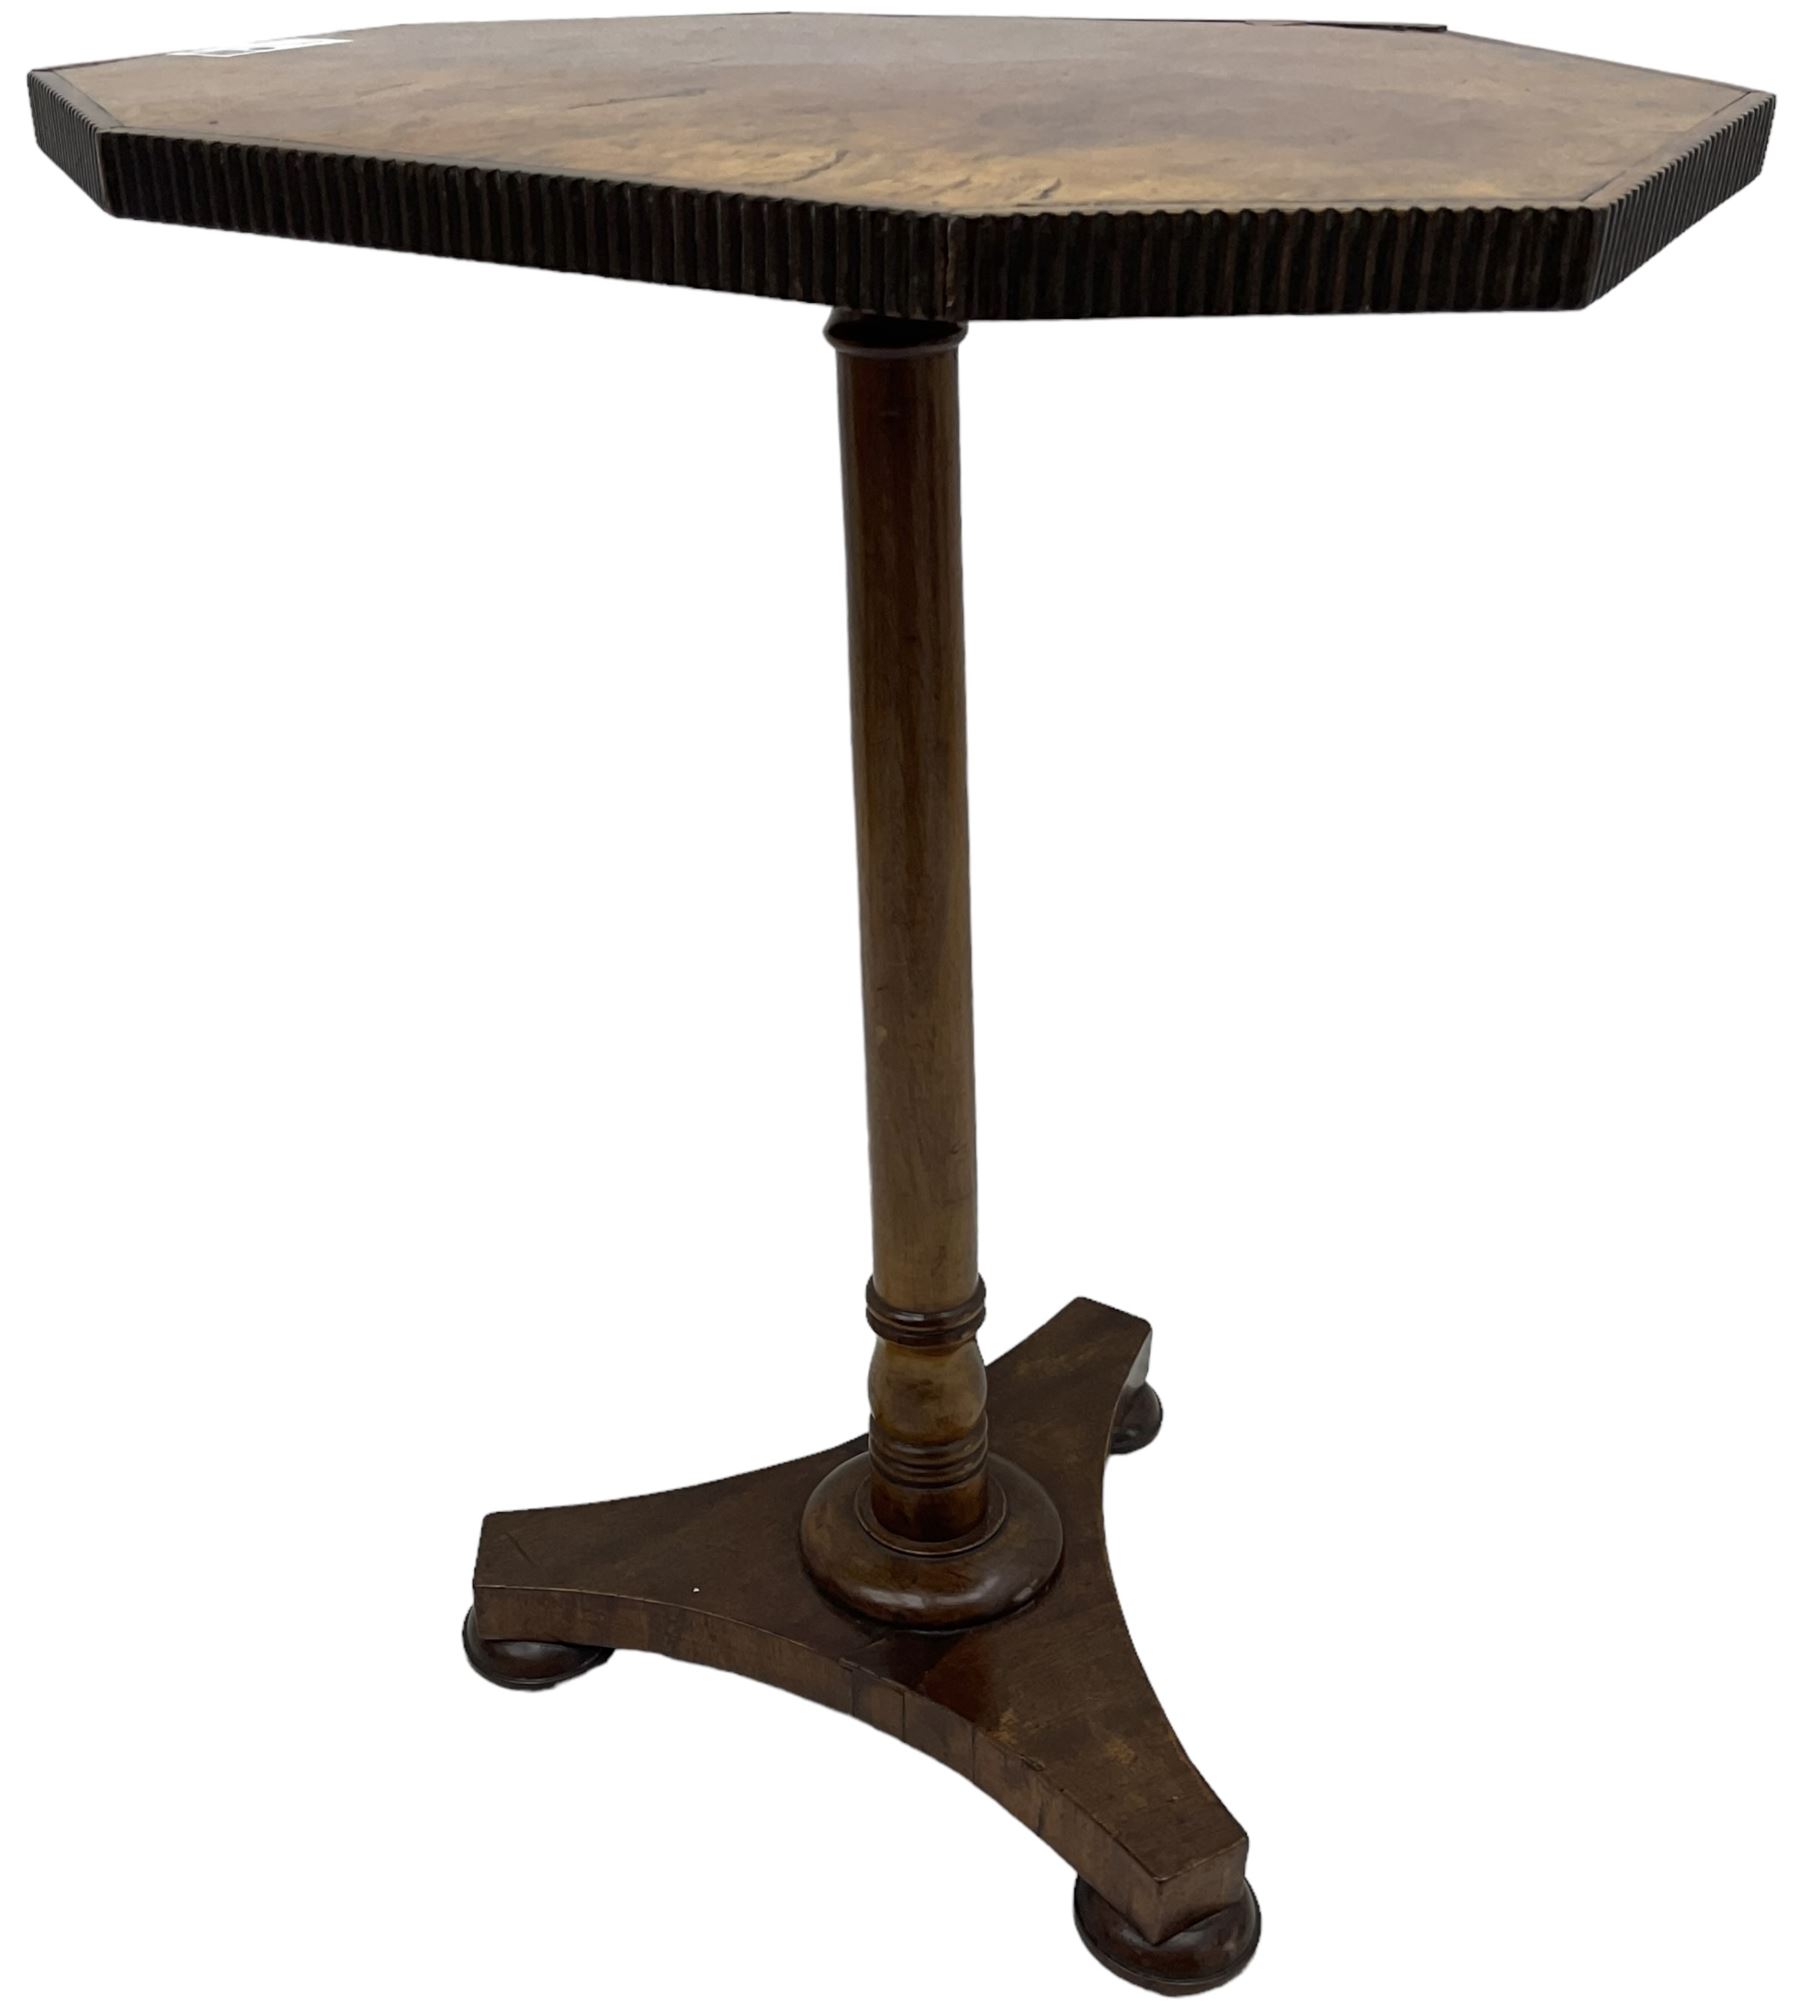 Simkin of London - 19th century figured walnut and mahogany occasional table - Image 3 of 5